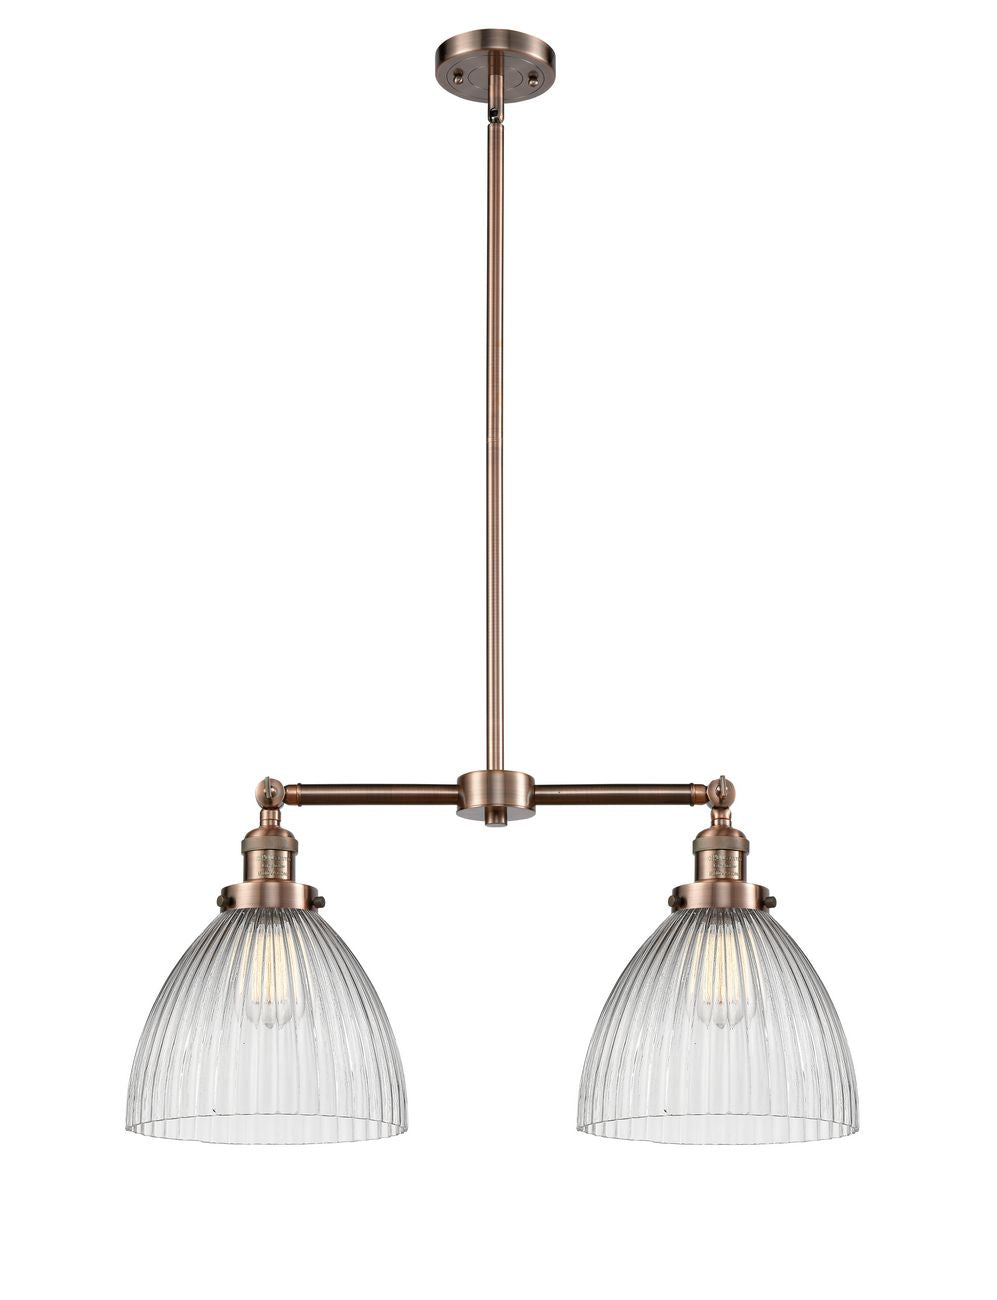 209-AC-G222 2-Light 21" Antique Copper Island Light - Clear Halophane Seneca Falls Glass - LED Bulb - Dimmensions: 21 x 5 x 10<br>Minimum Height : 23.125<br>Maximum Height : 47.125 - Sloped Ceiling Compatible: Yes